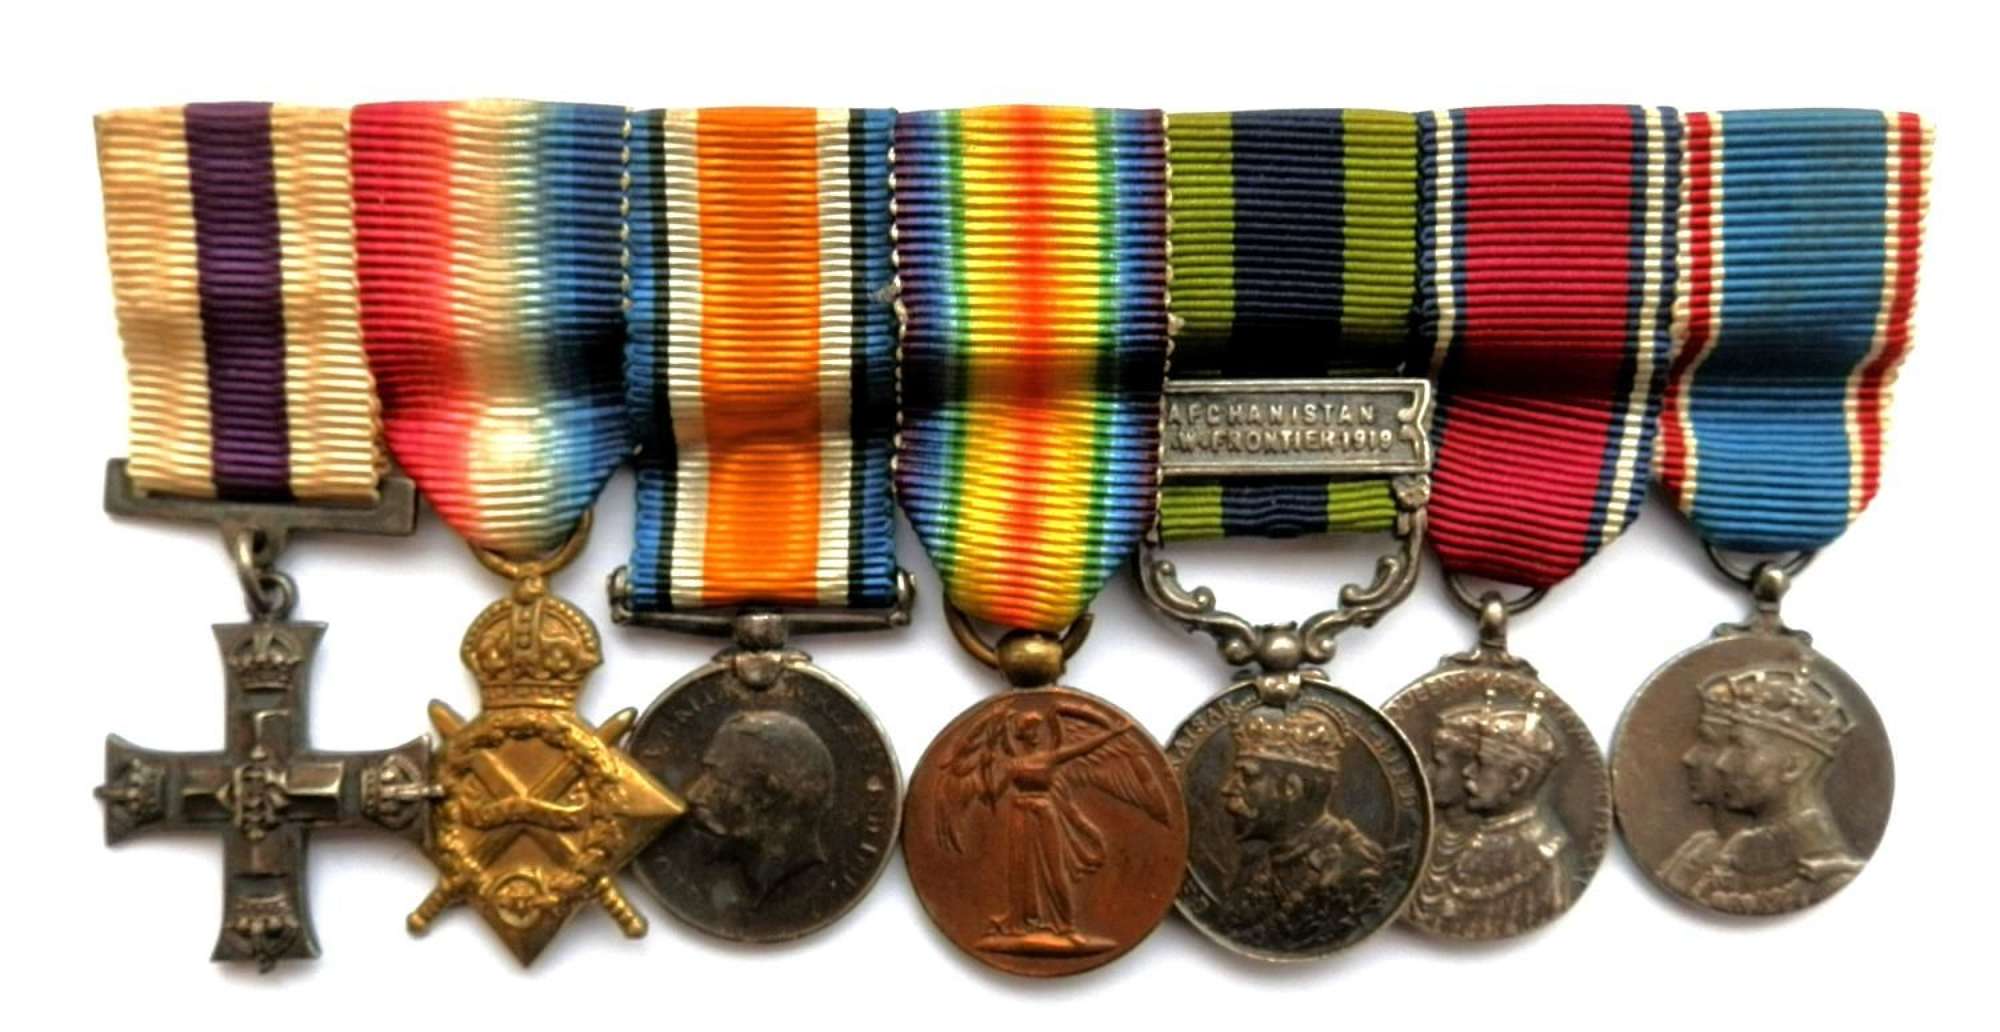 Contemporary Gallantry Group of Seven Miniature Medals. Un-attributed.